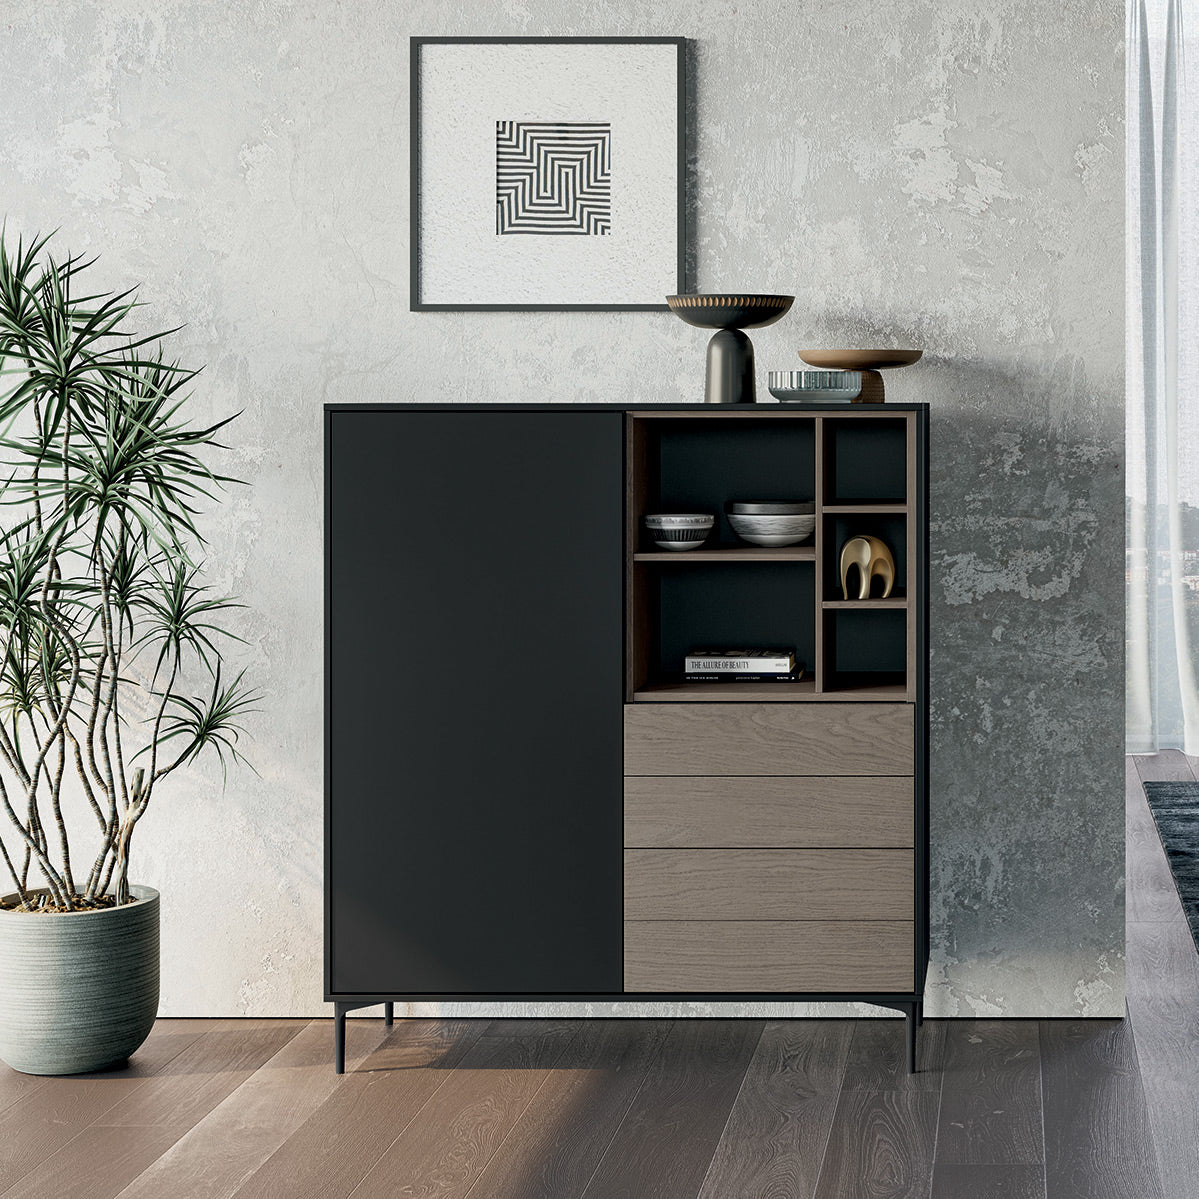 Code 11 large storage cabinet by Dall'Agnese